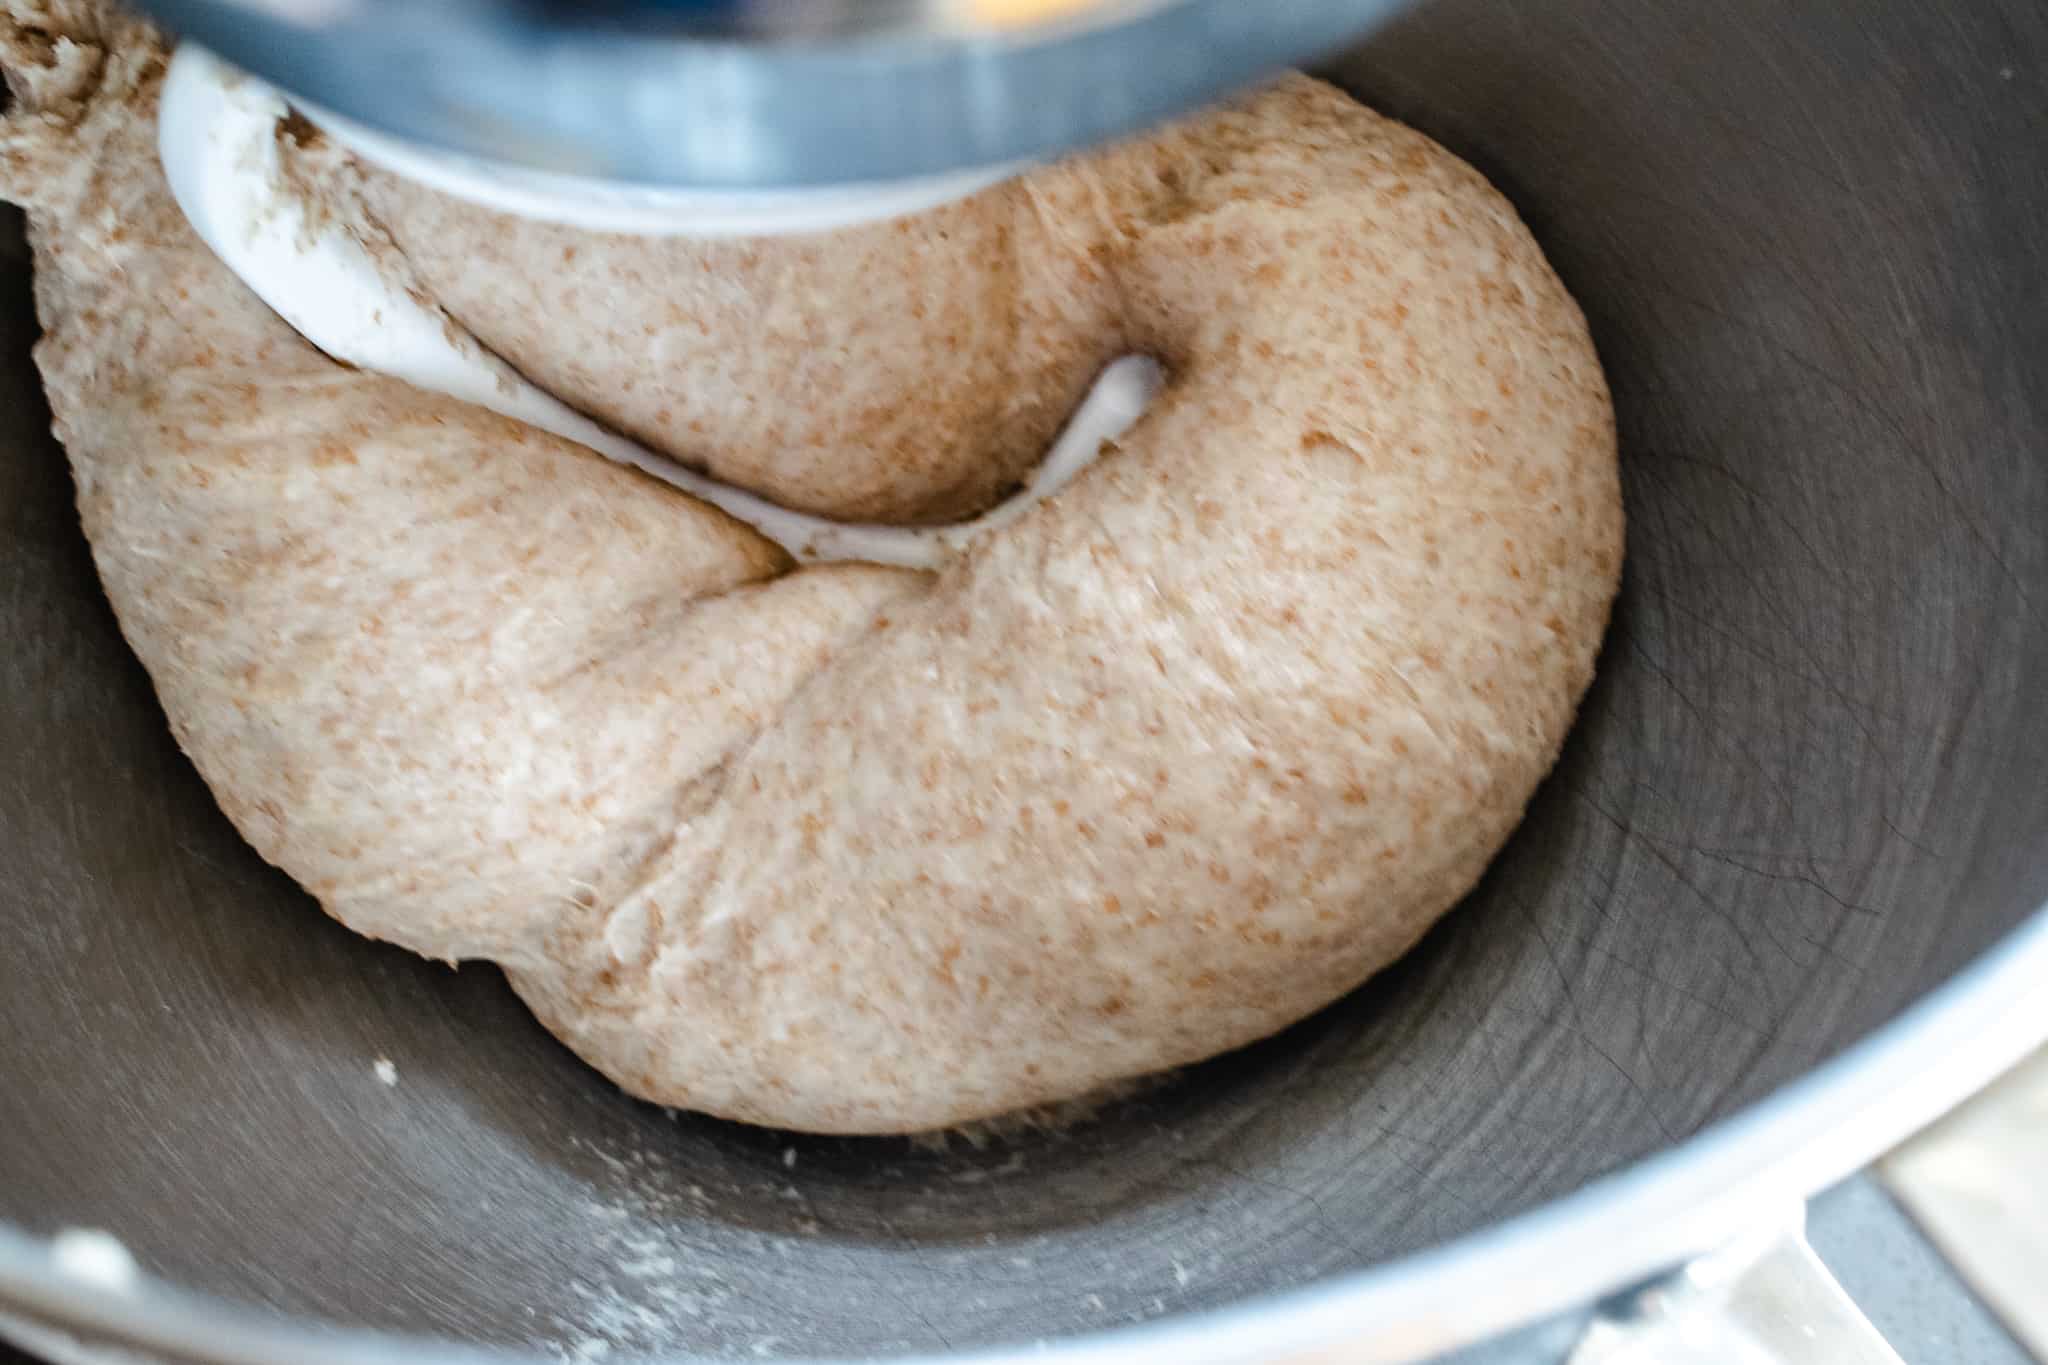 mixer and dough hook kneading whole wheat dough for sandwich bread